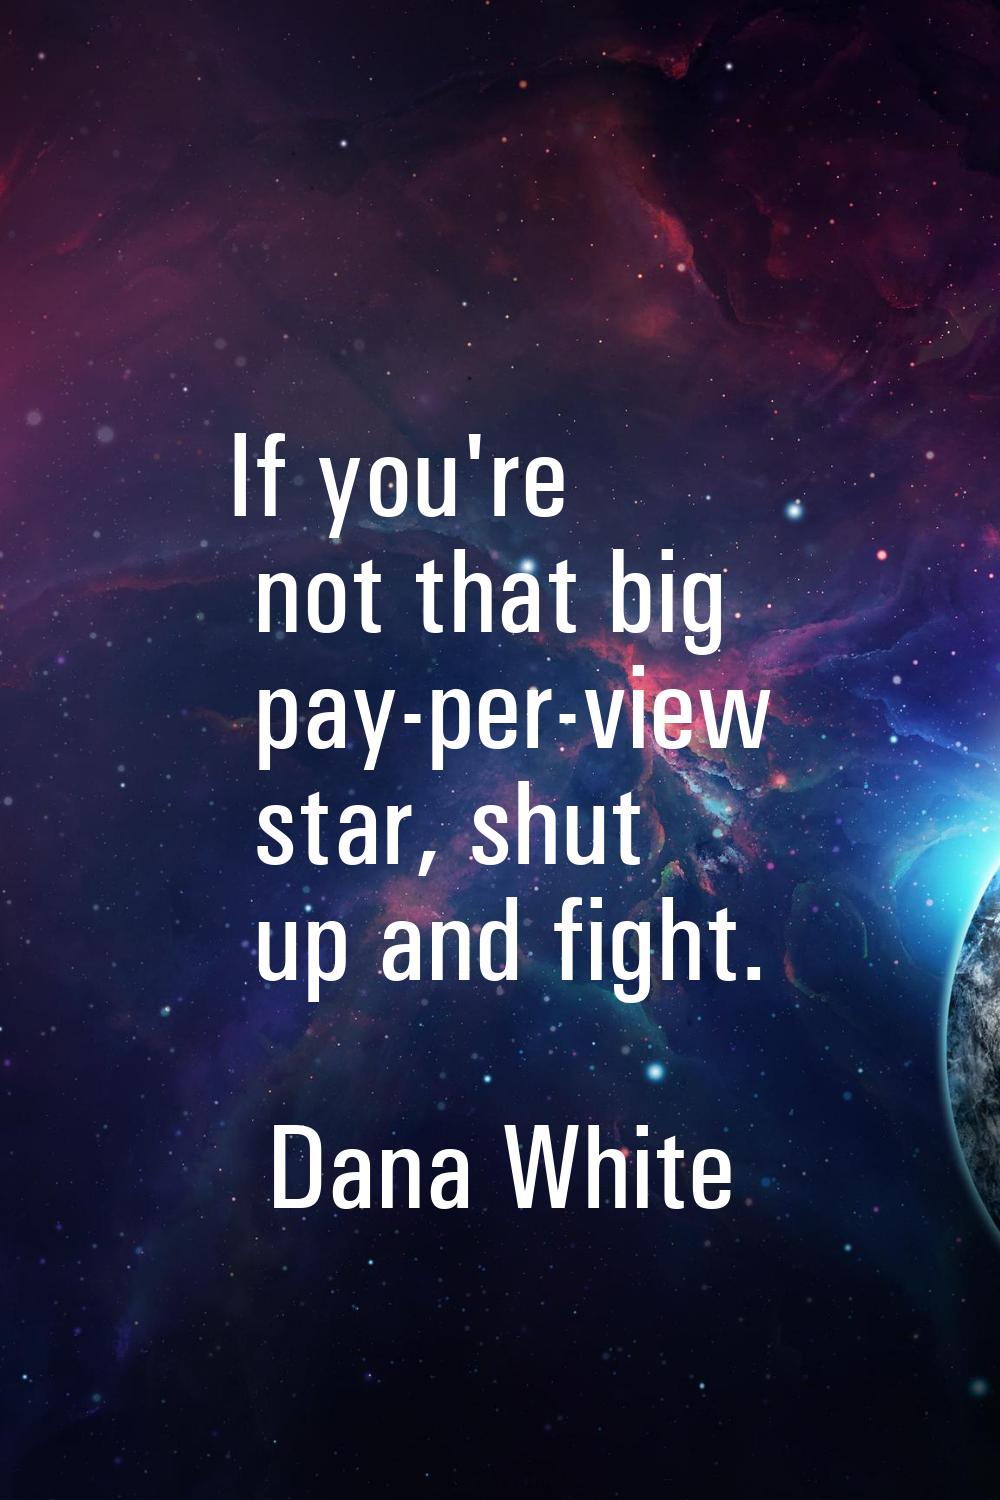 If you're not that big pay-per-view star, shut up and fight.